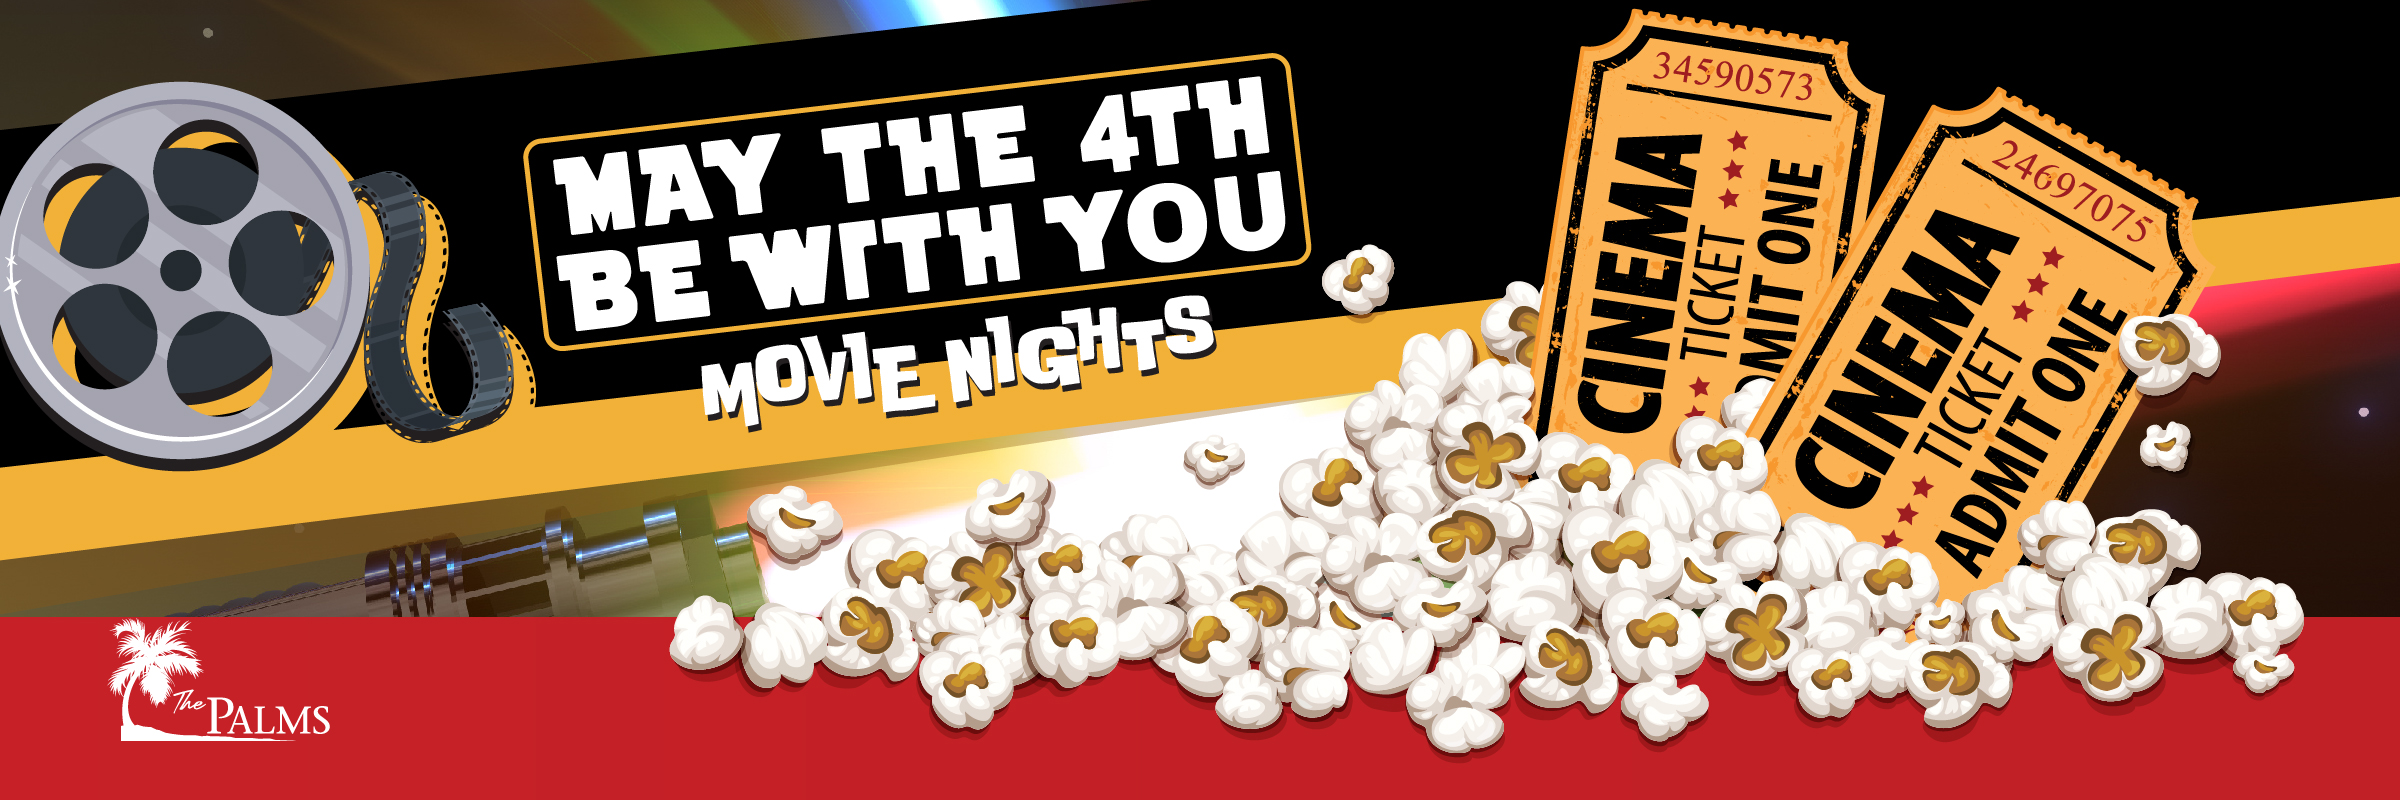 24-0204 May the Fourth Be With You Movie Nights_Website Desktop Carousel.jpg